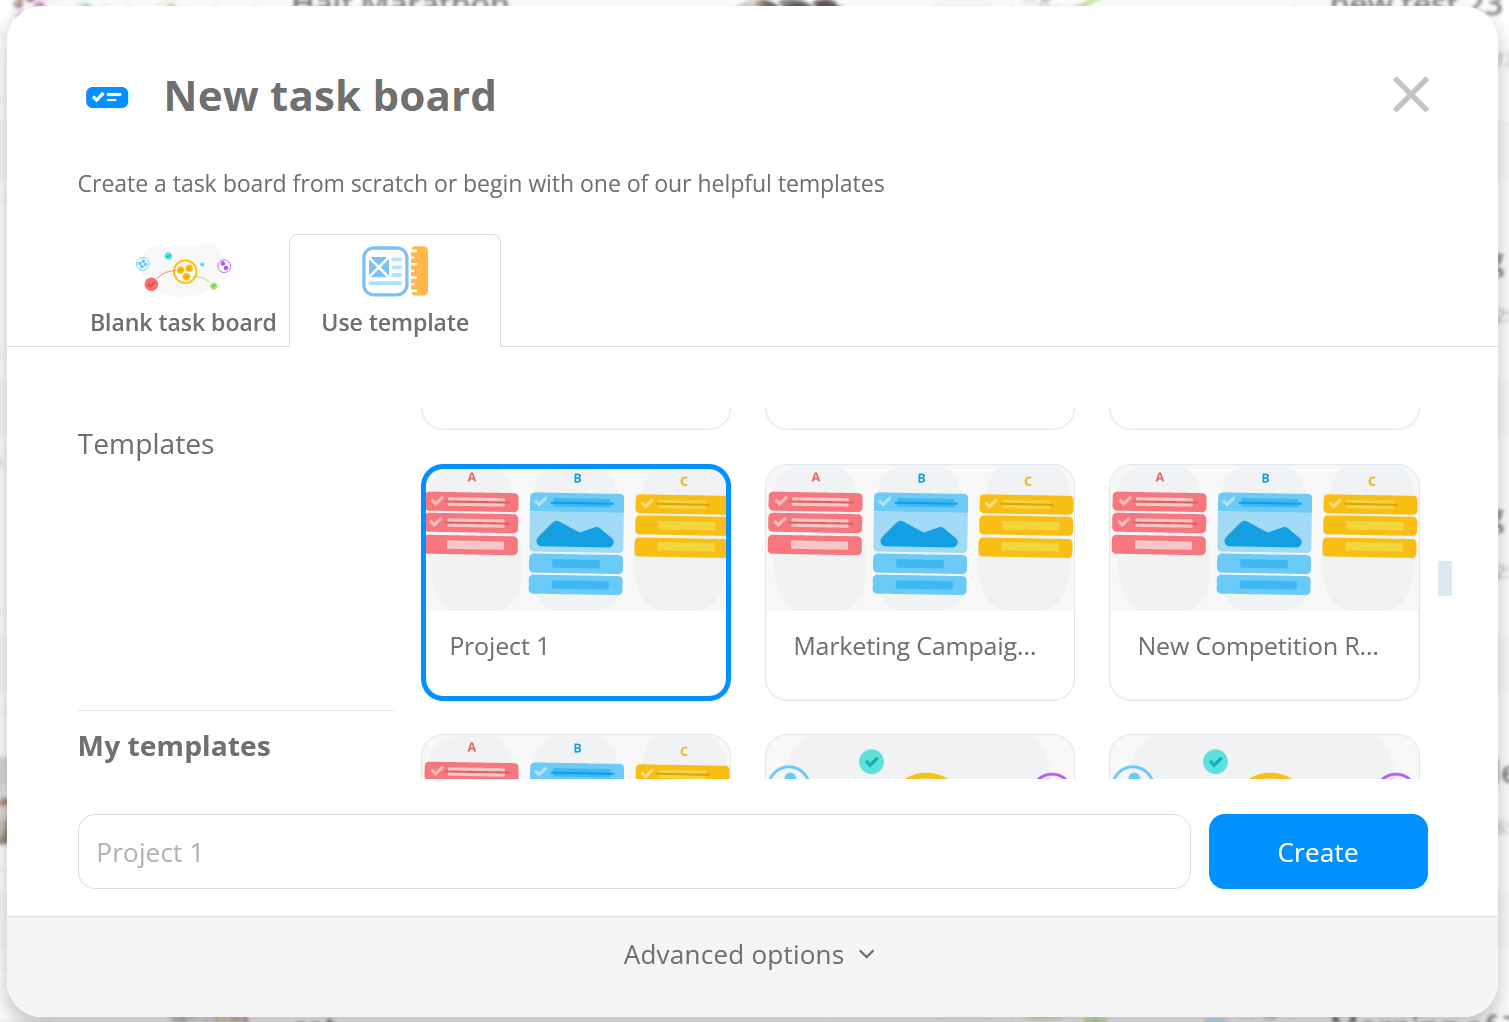 Confirming creating a new task board.